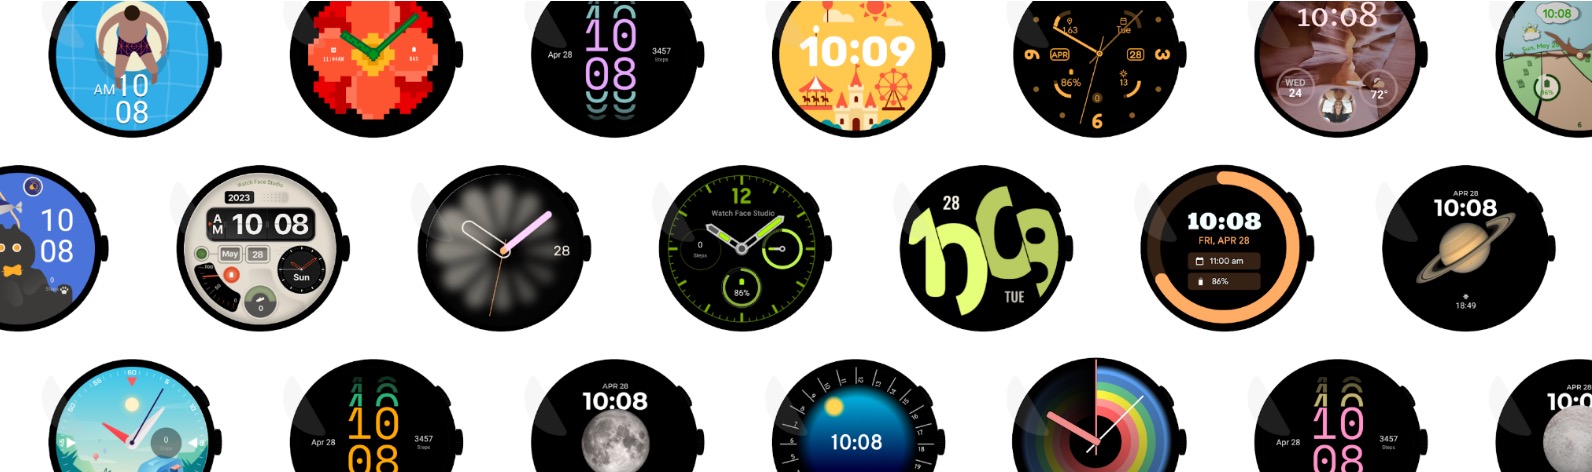 Google previews Wear OS 4 with better battery life, third-party watch face support